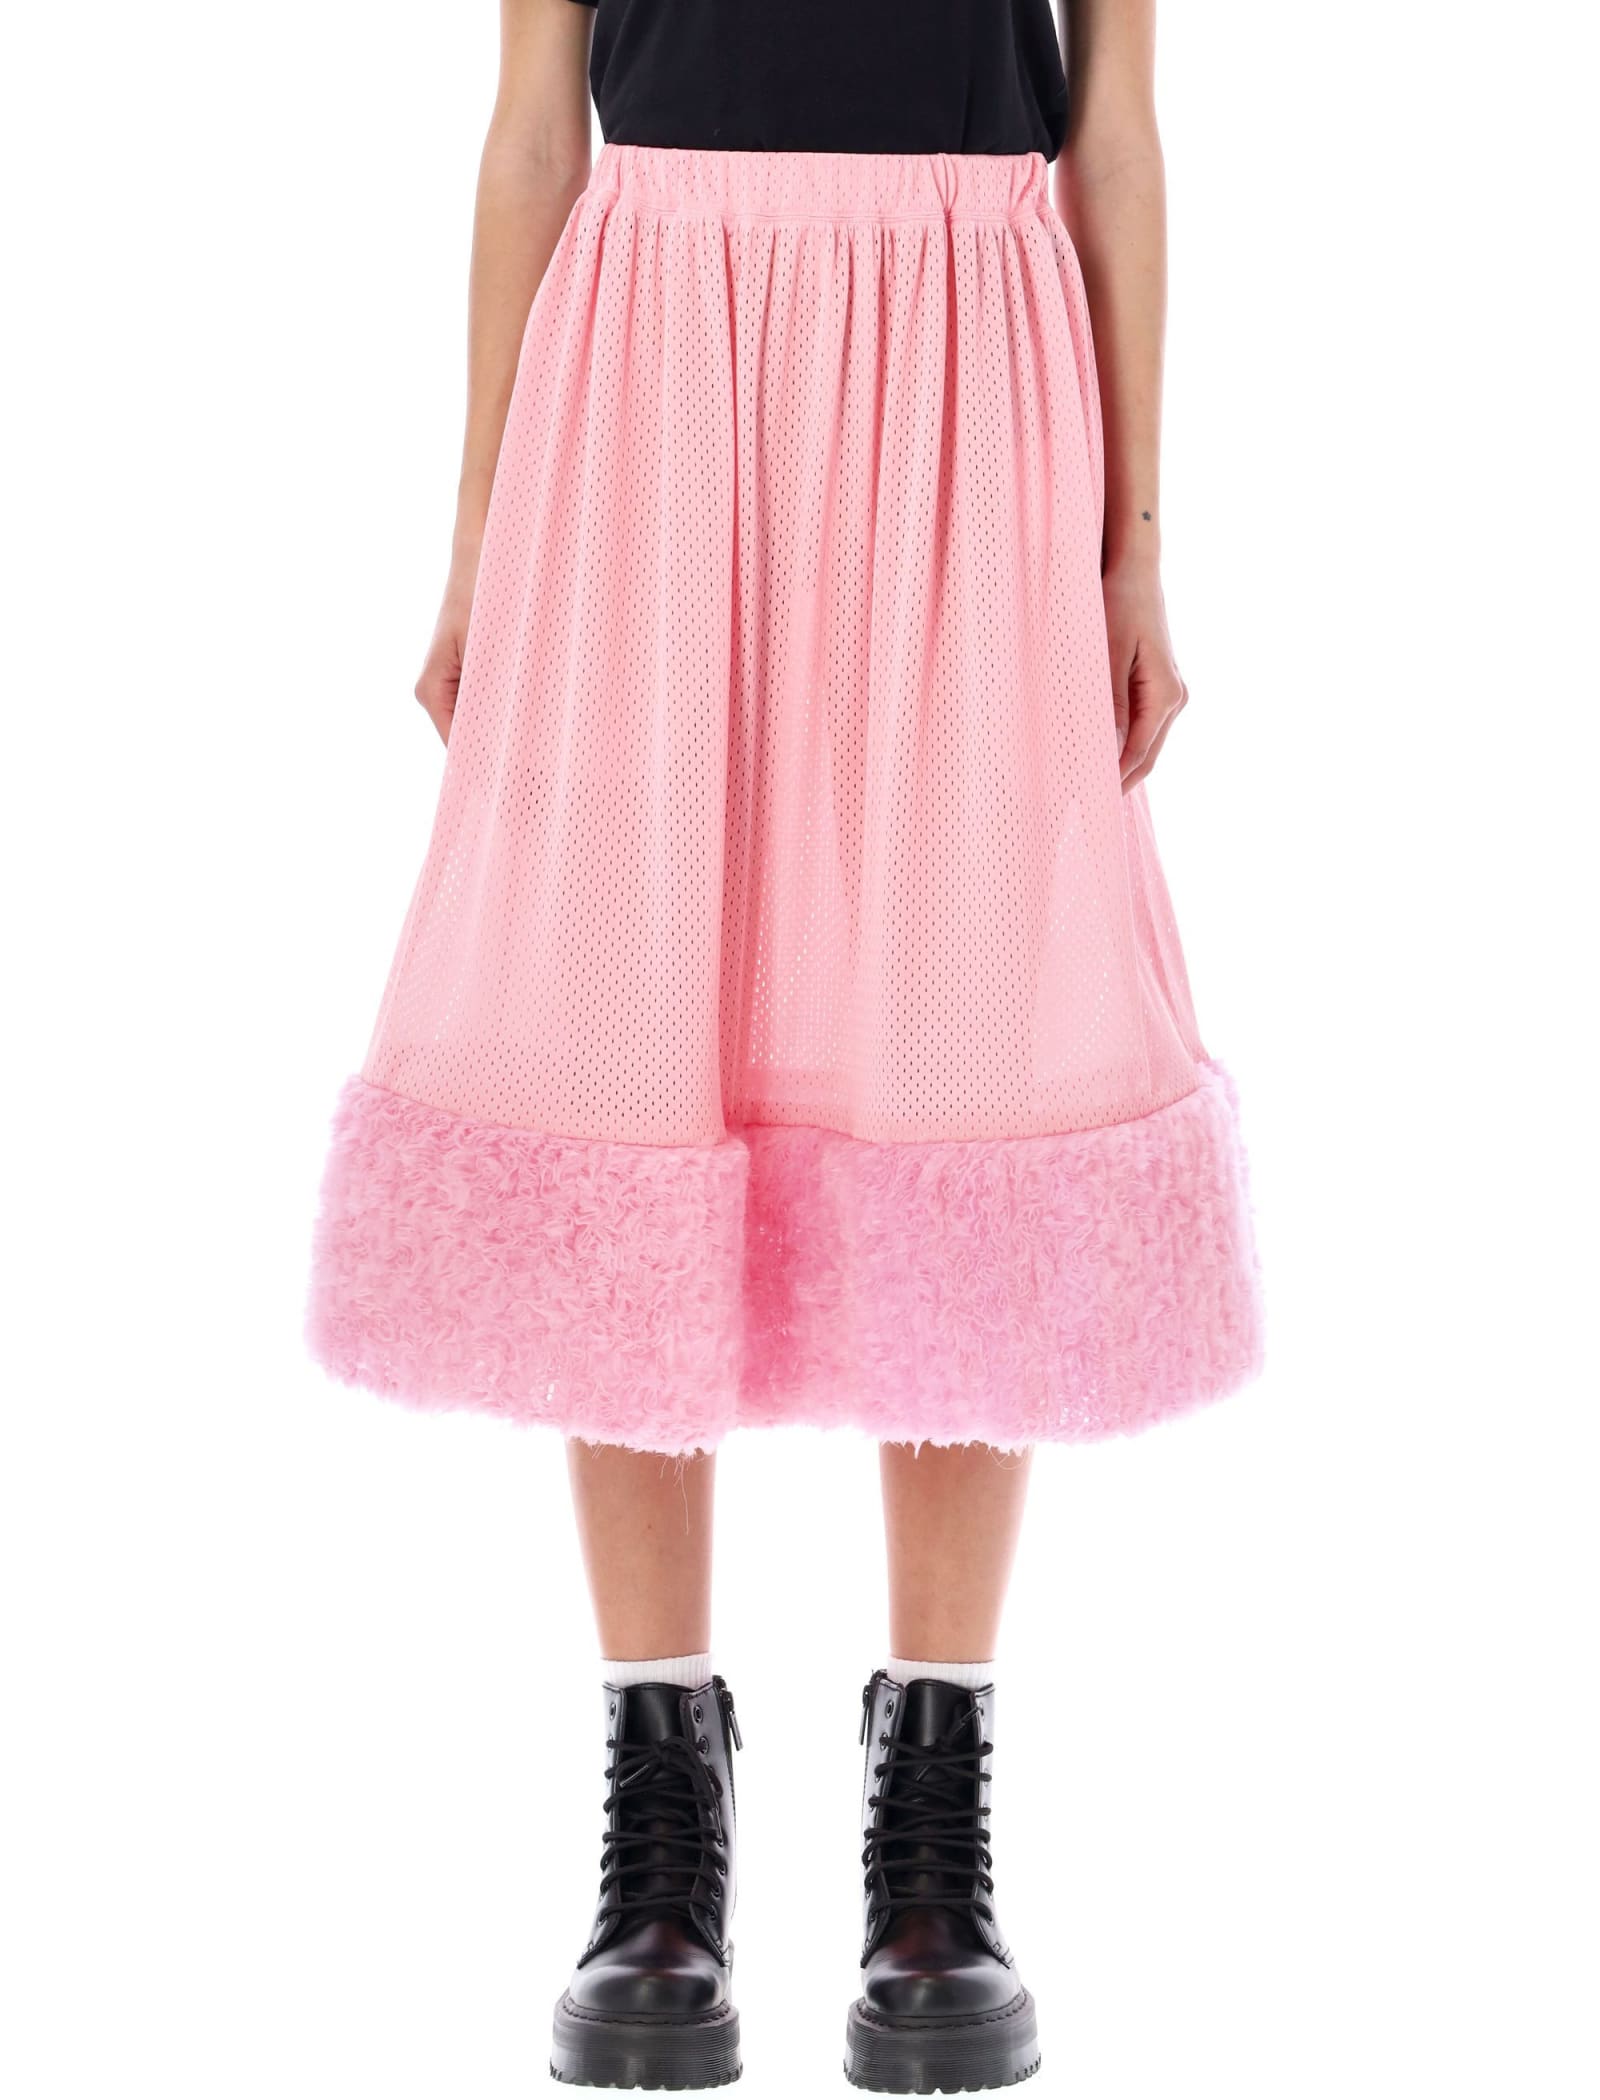 COMME DES GARCONS GIRL MESH SKIRT WITH TULLE APPLIQUÉ AT BOTTOM